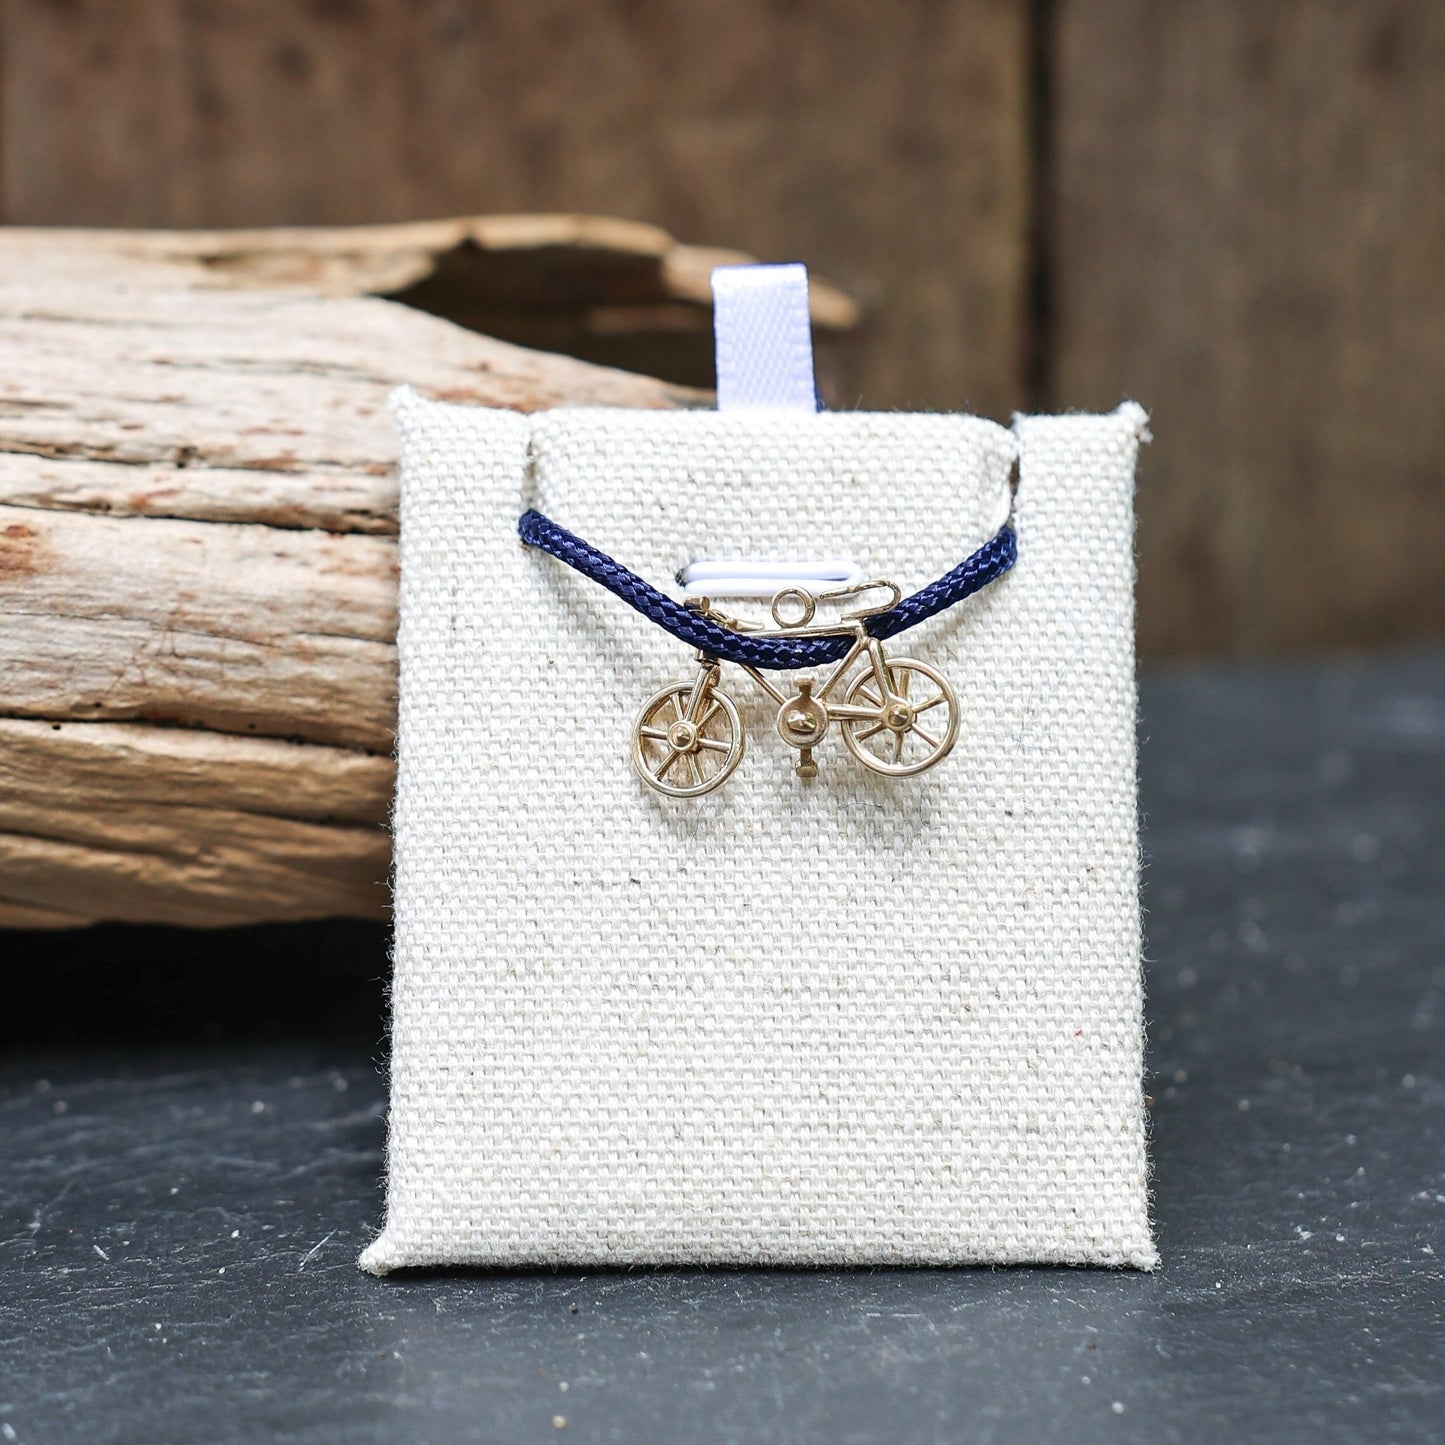 14K Yellow Gold Vintage Bicycle Charm with Articulated Front Wheel by Jewel in the Sea Nantucket